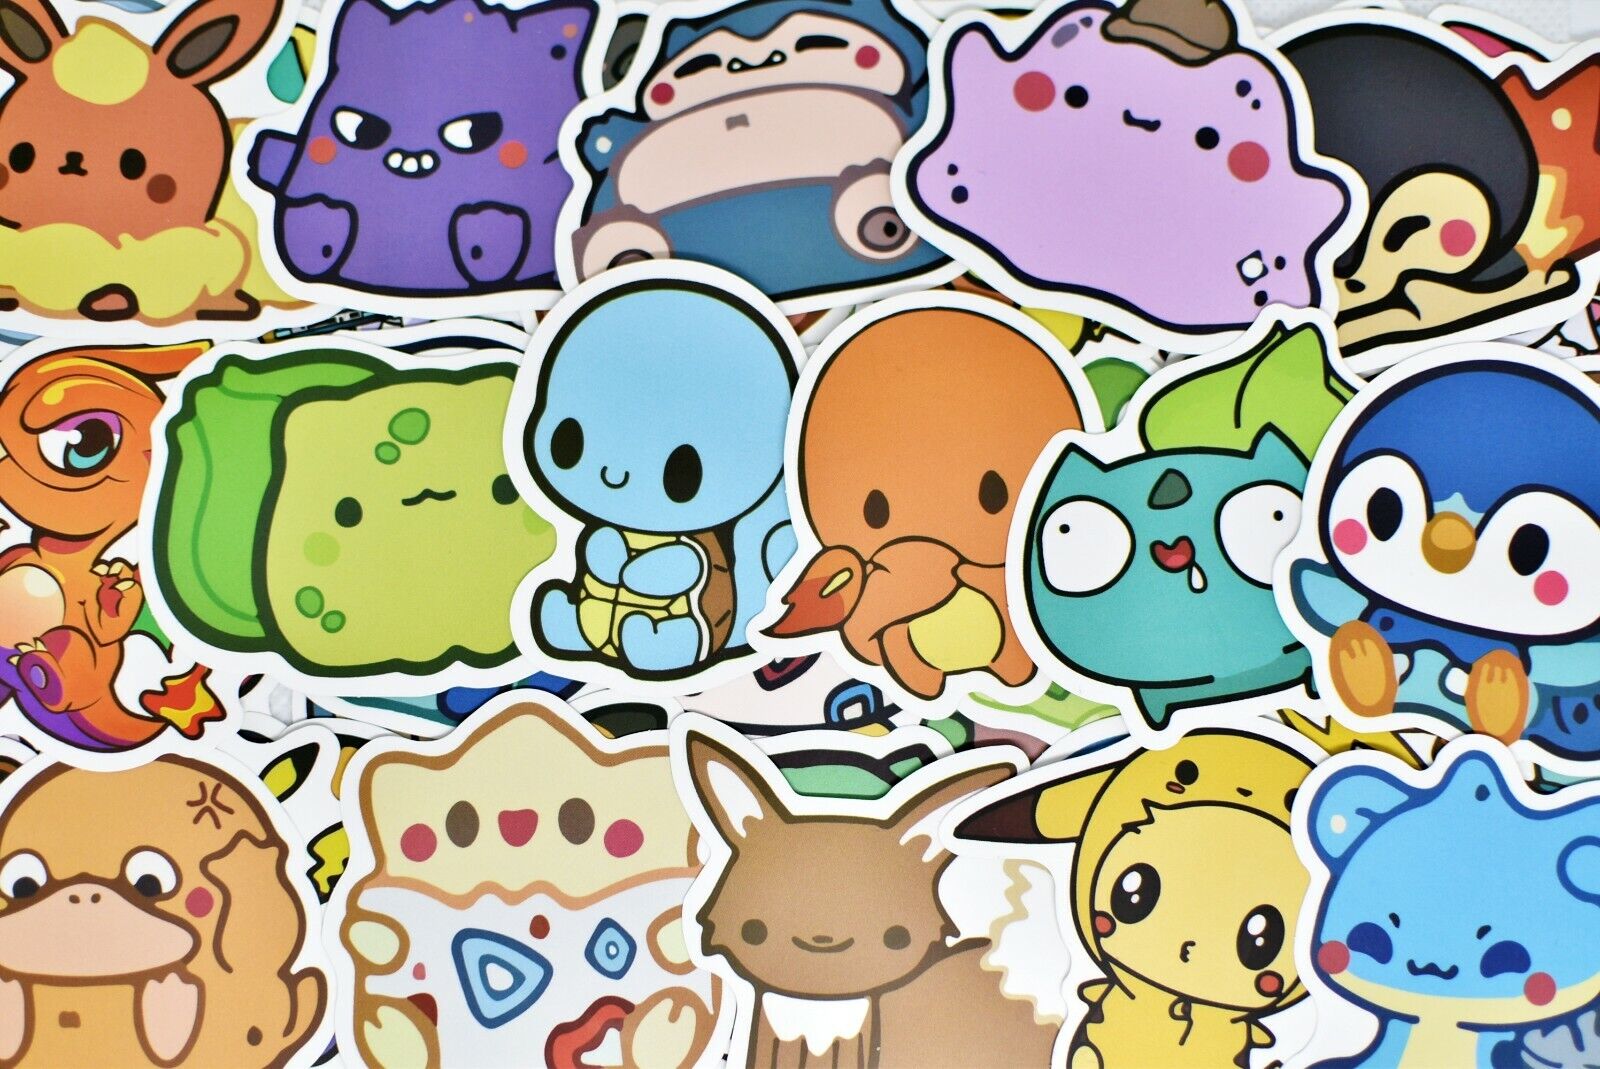 50 latest Pokemon Go Stickers online shop for Flask Sui Switch Hydro Laptop